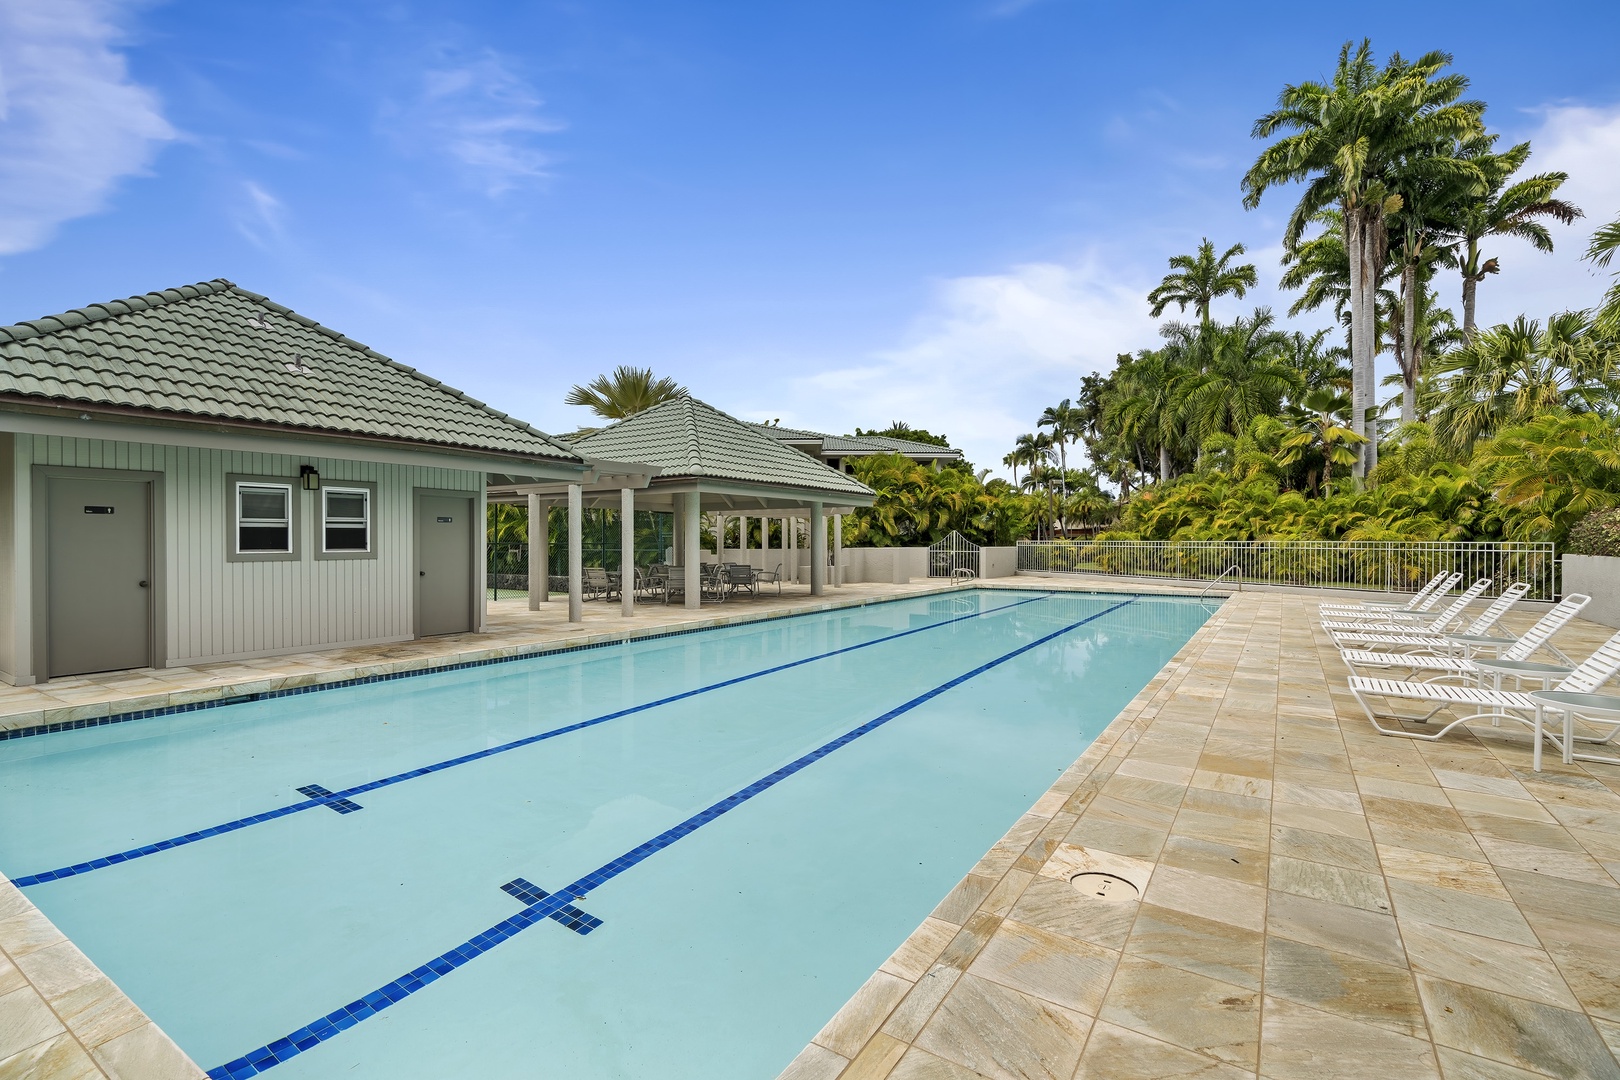 Kailua Kona Vacation Rentals, Ali'i Point #12 - Community pool accessible to the guests of Alii Point